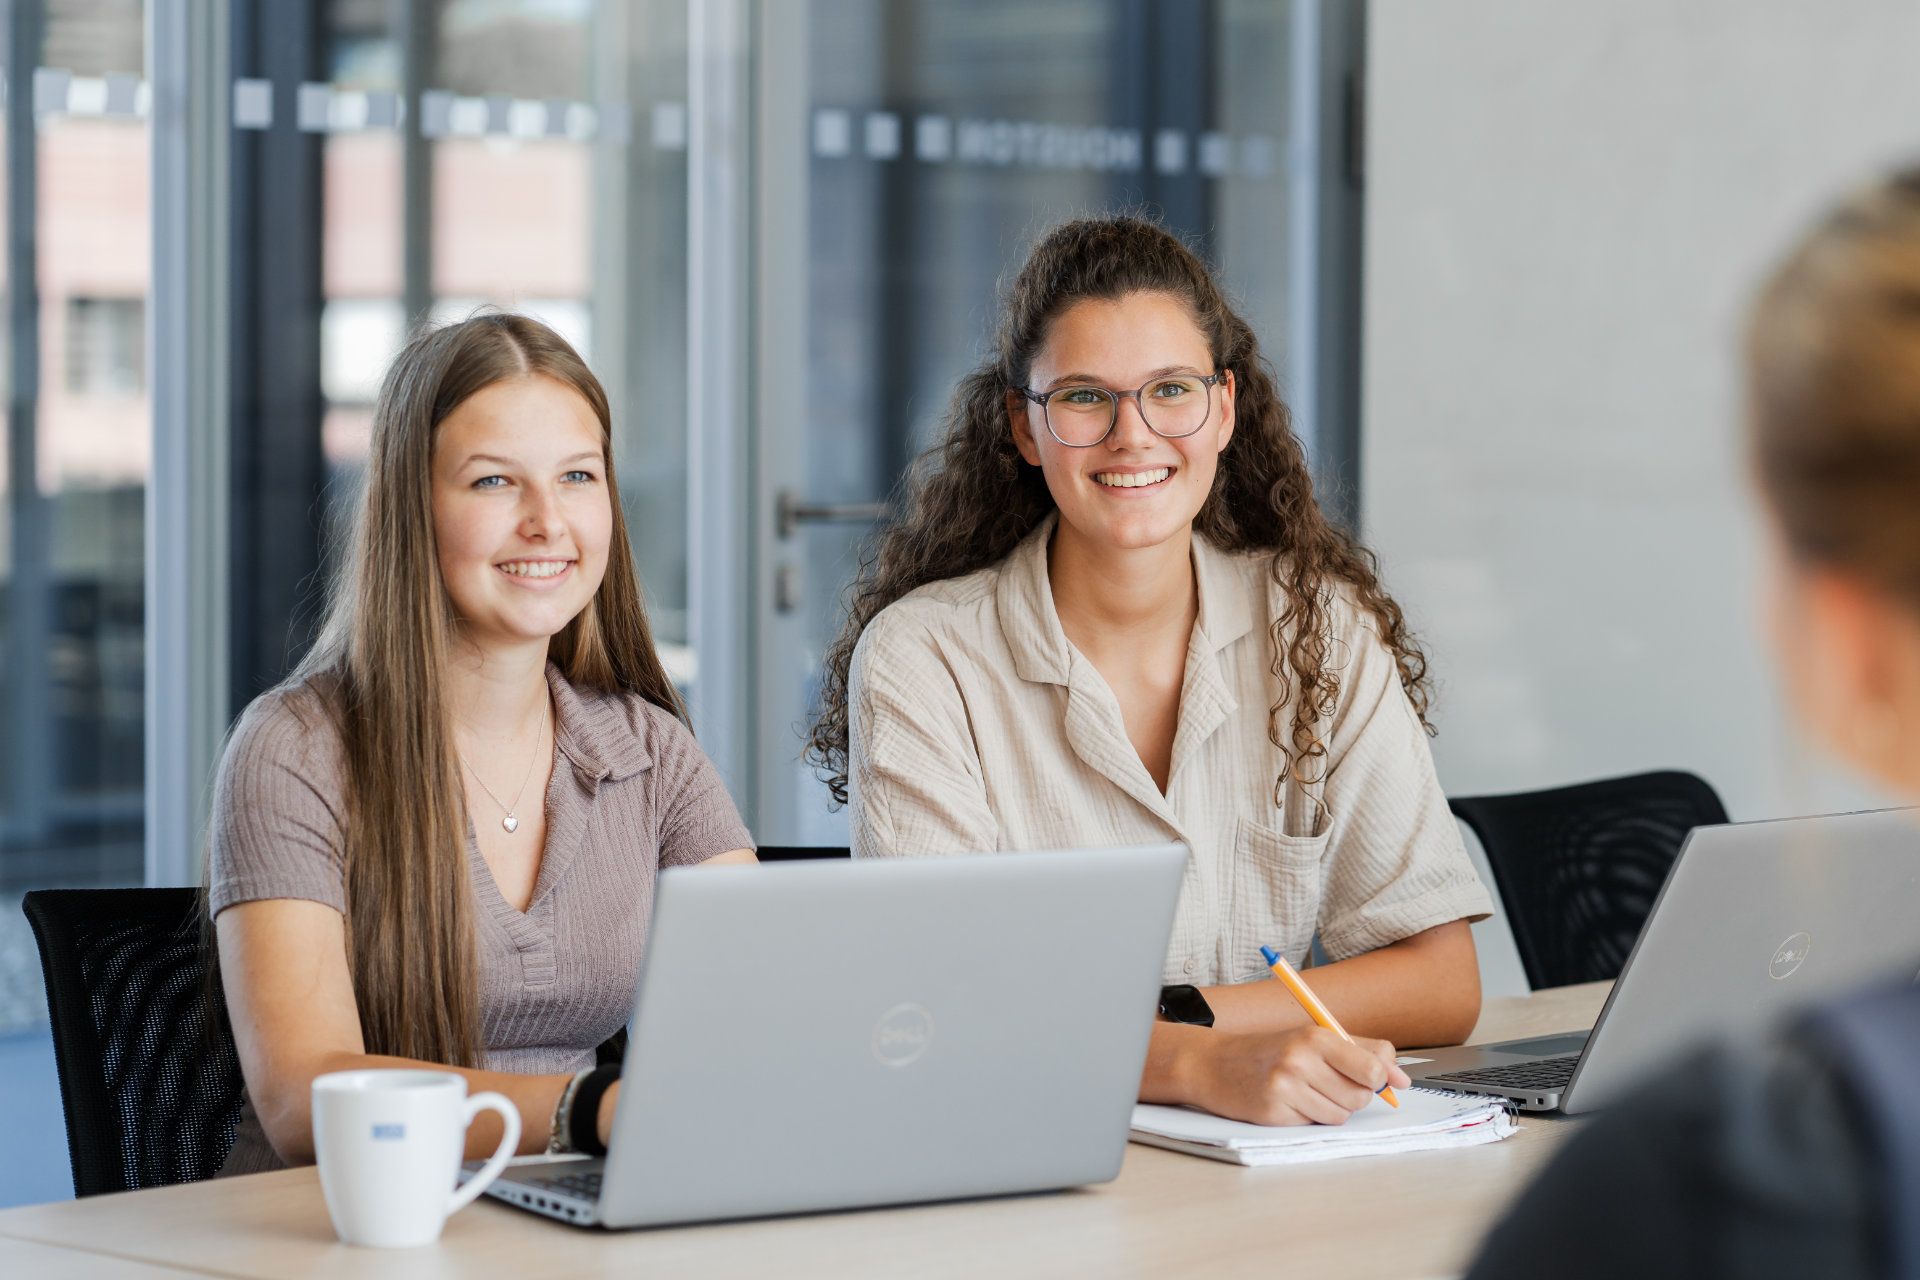 Two smiling professional women engaging in a collaborative work session at a conference table with laptops and notebooks, exuding a friendly and productive atmosphere, captured beautifully by Alexander Möller.